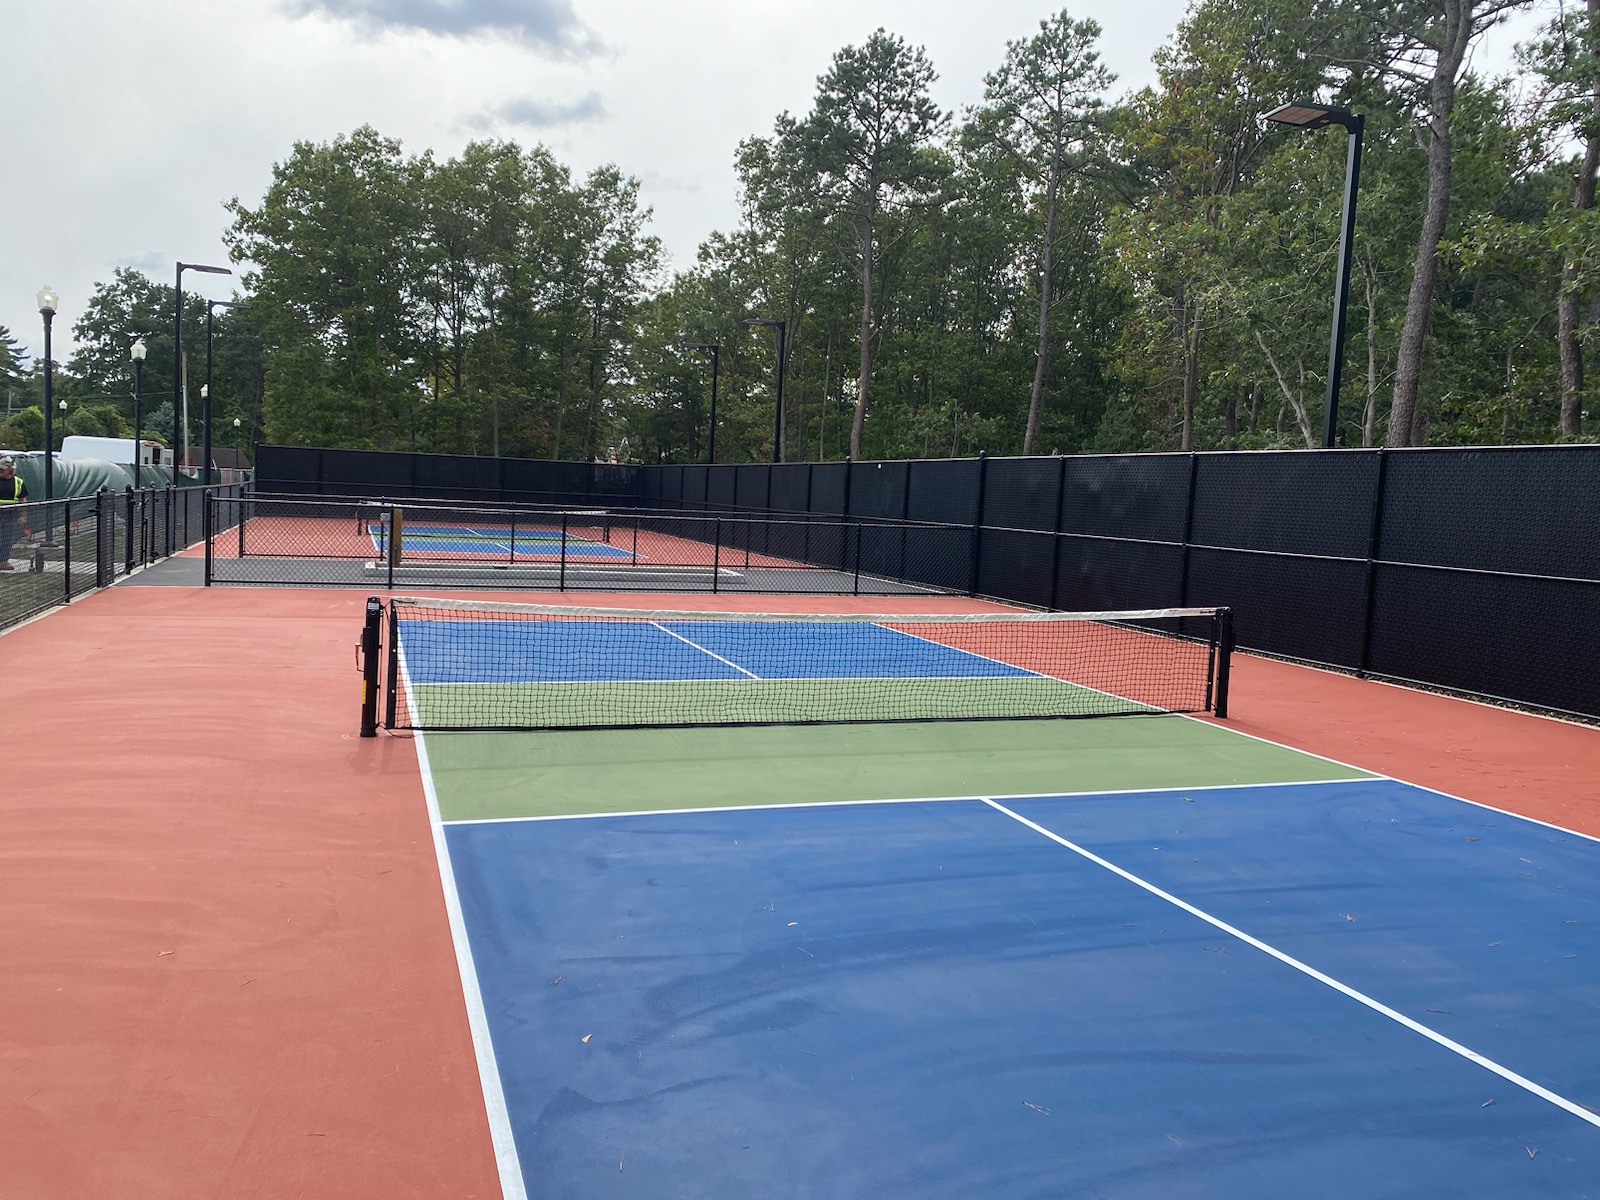 Our facility includes two state-of-the-art pickleball courts.